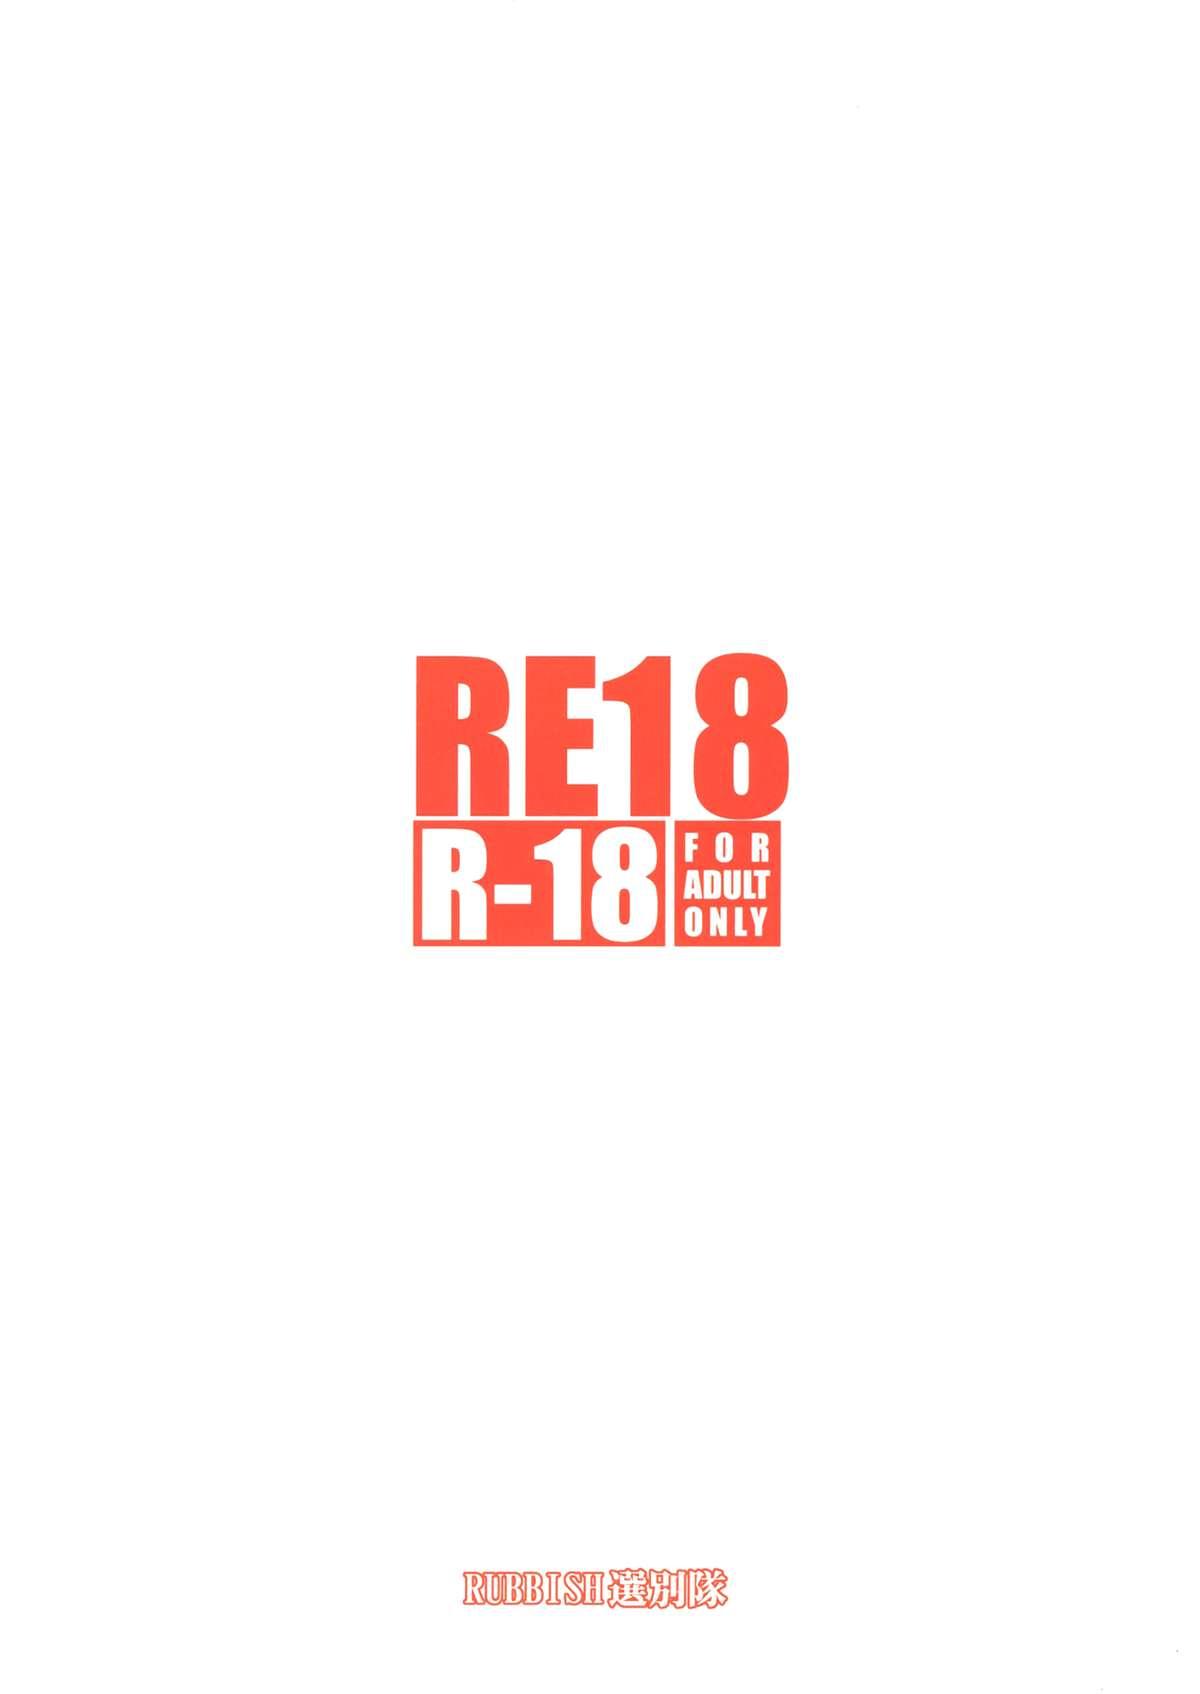 RE 18 1